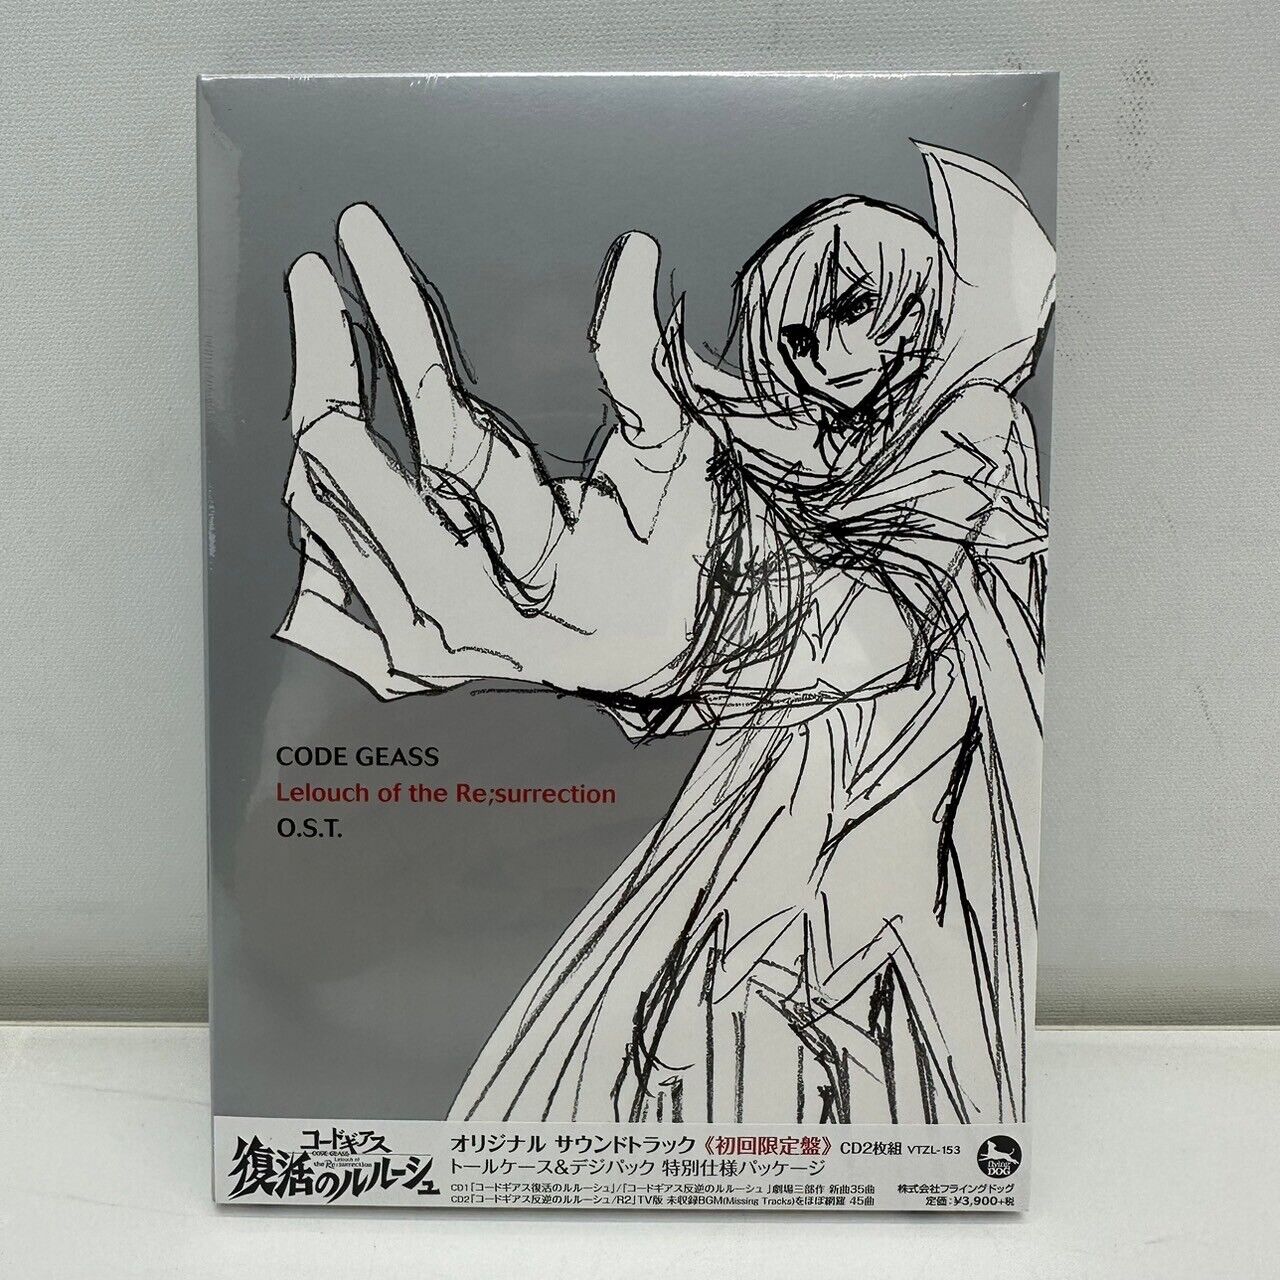 Anime Code Geass Lelouch of the Resurrection Soundtrack Limited First Edition